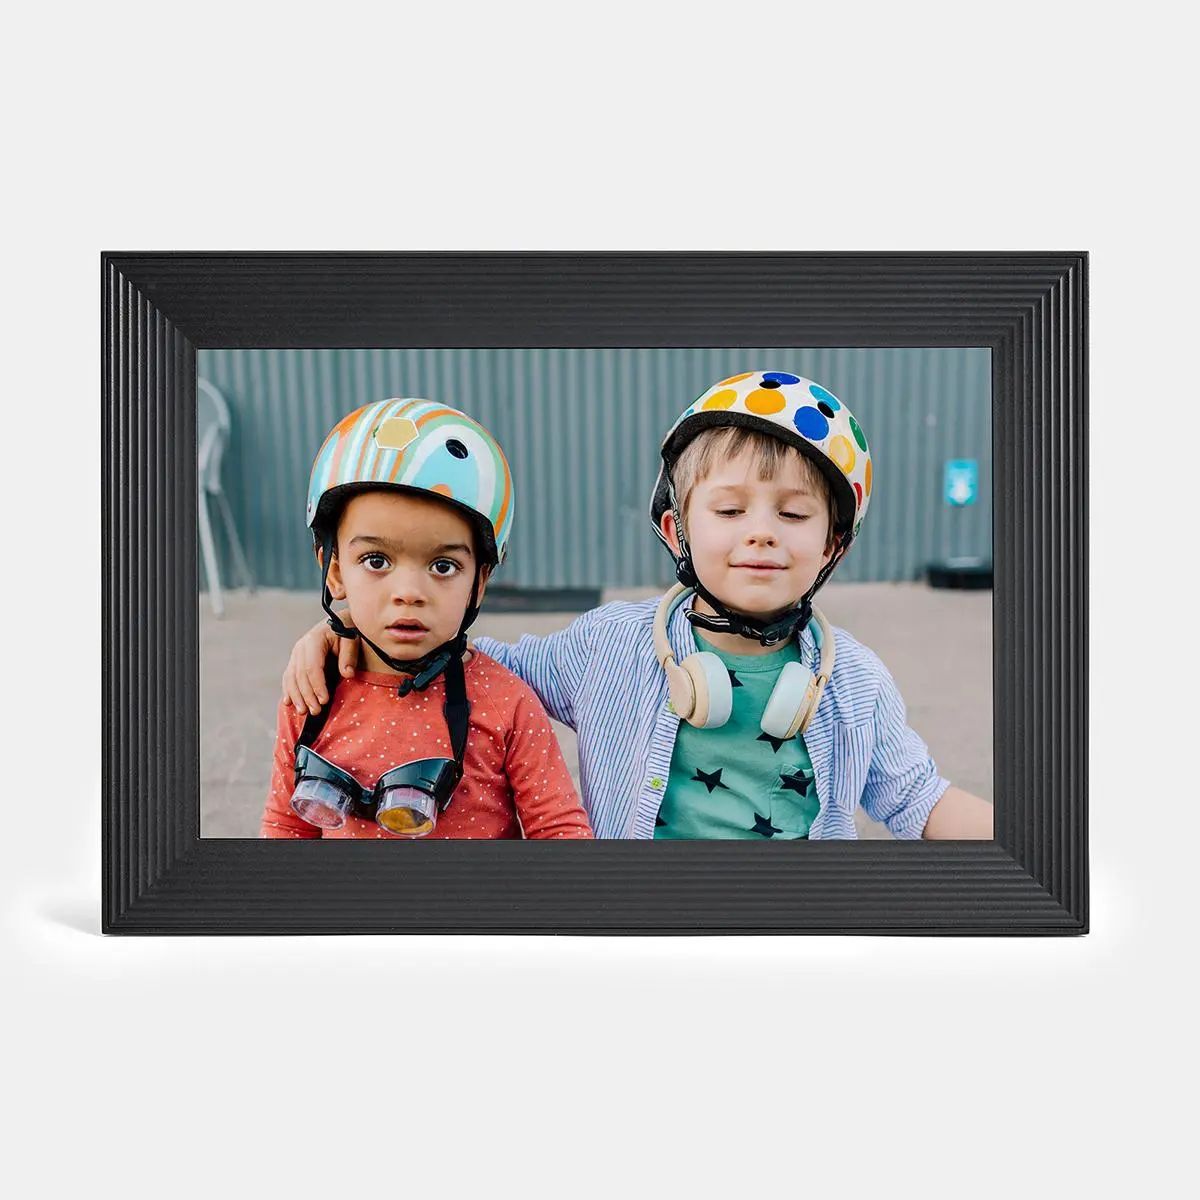  Skylight Digital Picture Frame: WiFi Enabled with Load from  Phone Capability, Touch Screen Digital Photo Frame Display - Customizable  Gift for Friends and Family - 10 Inch Black : Electronics